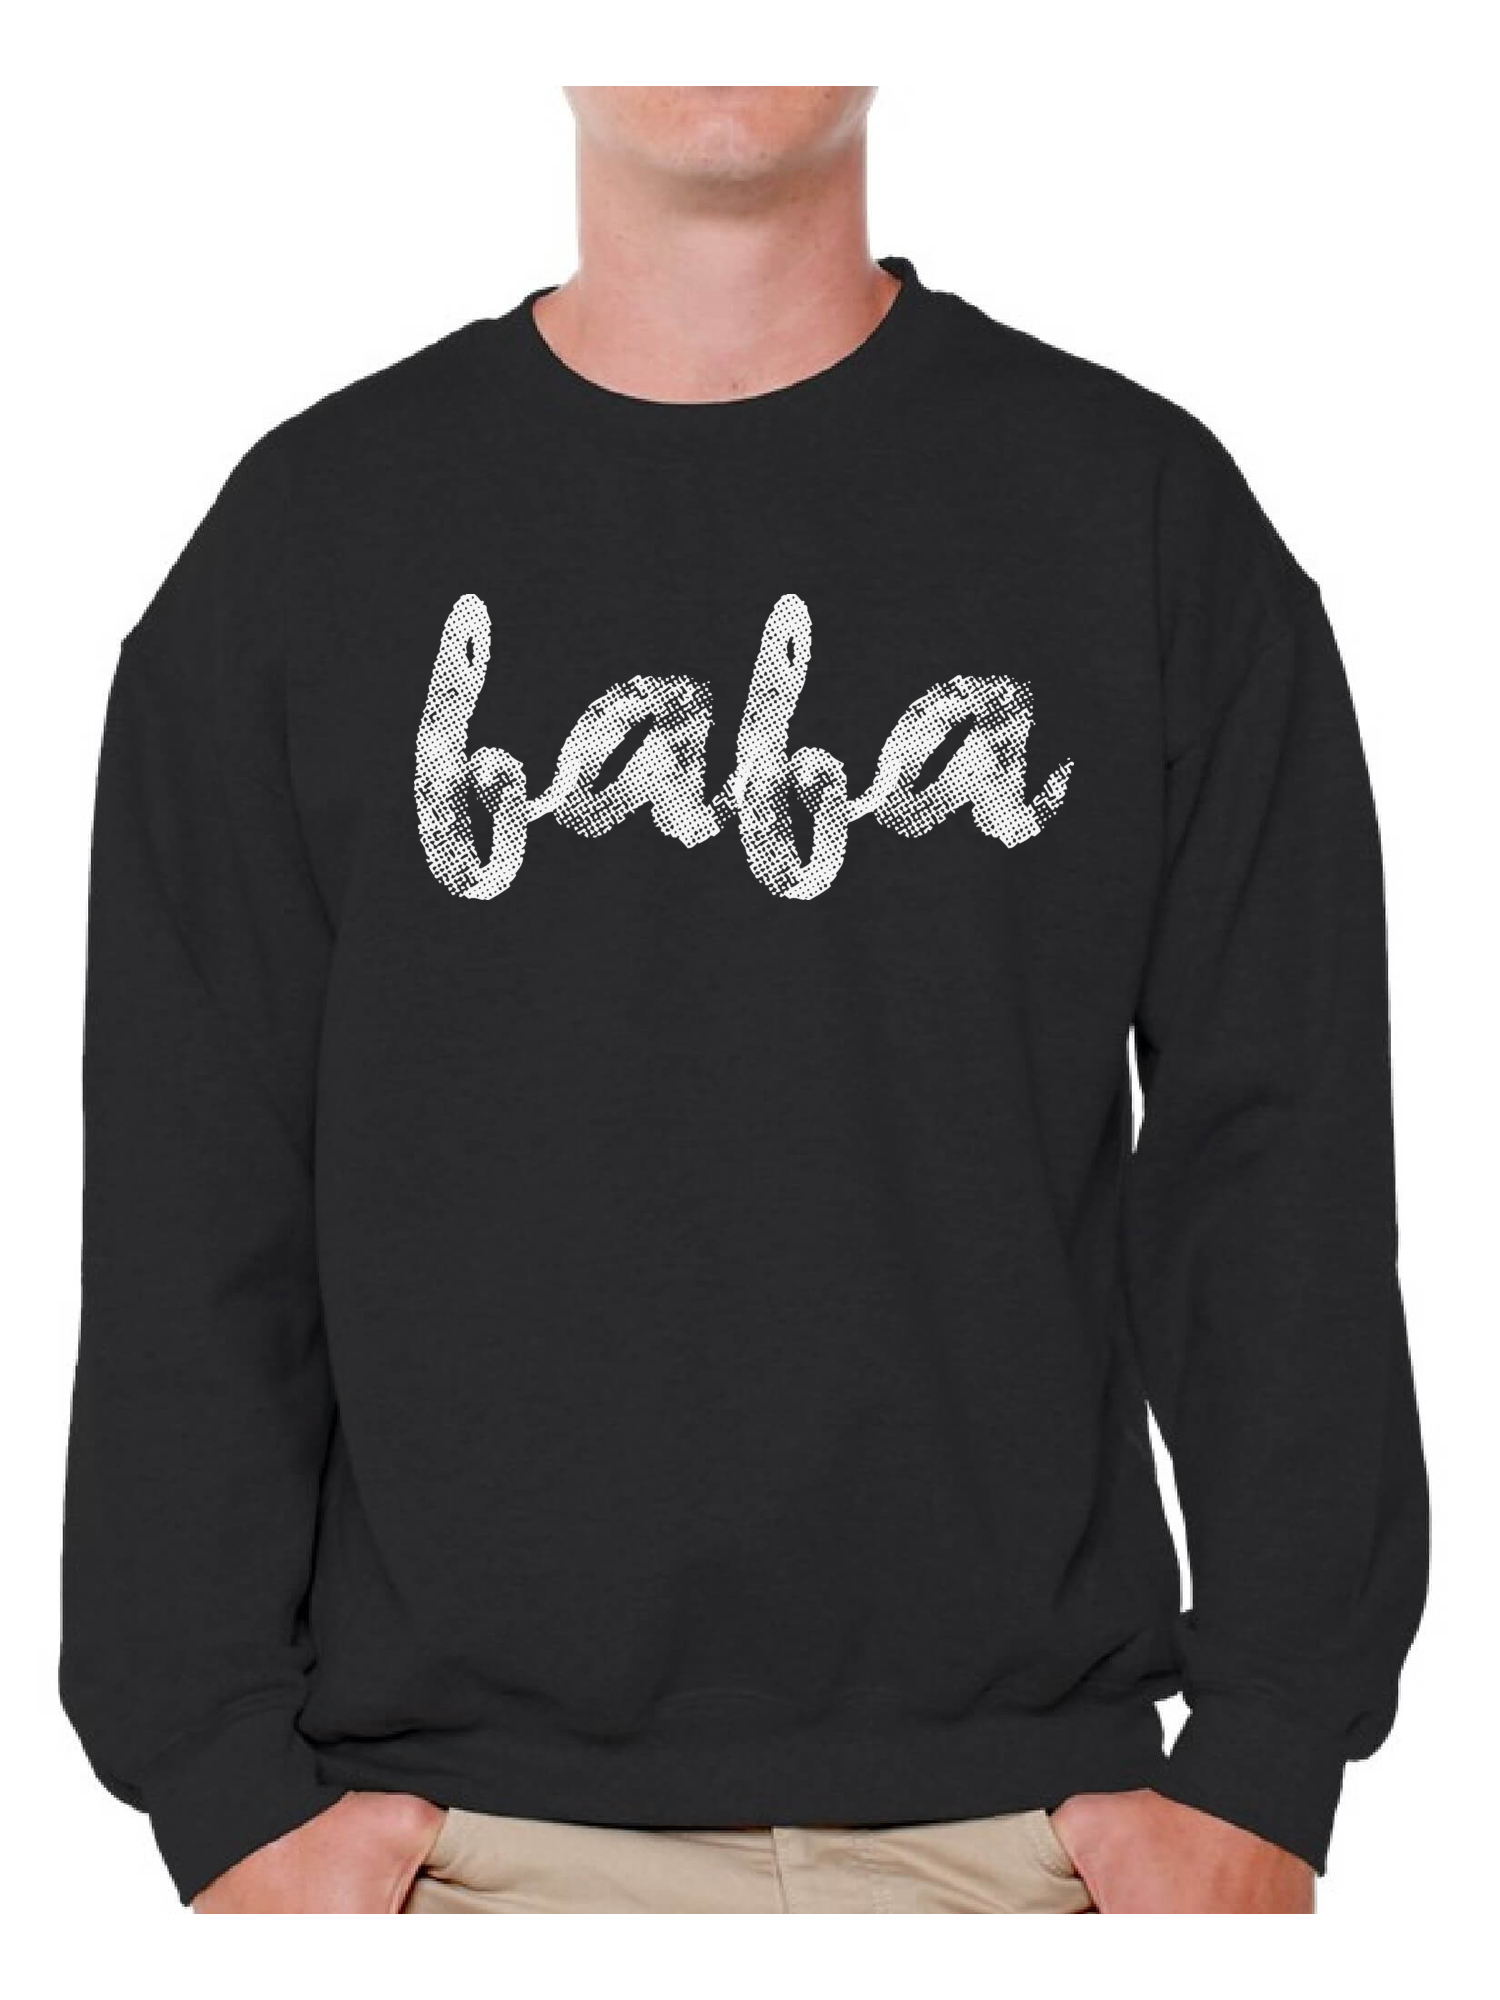 Awkward Styles Cute Gifts for the Best Dad Men Crewneck Dads Sweatshirt Best Father`s Day Gift Crewneck for Dad Father`s Day Crewneck Best Baba Ever Crewneck Baba Collection Father`s Day Crewneck - image 1 of 4